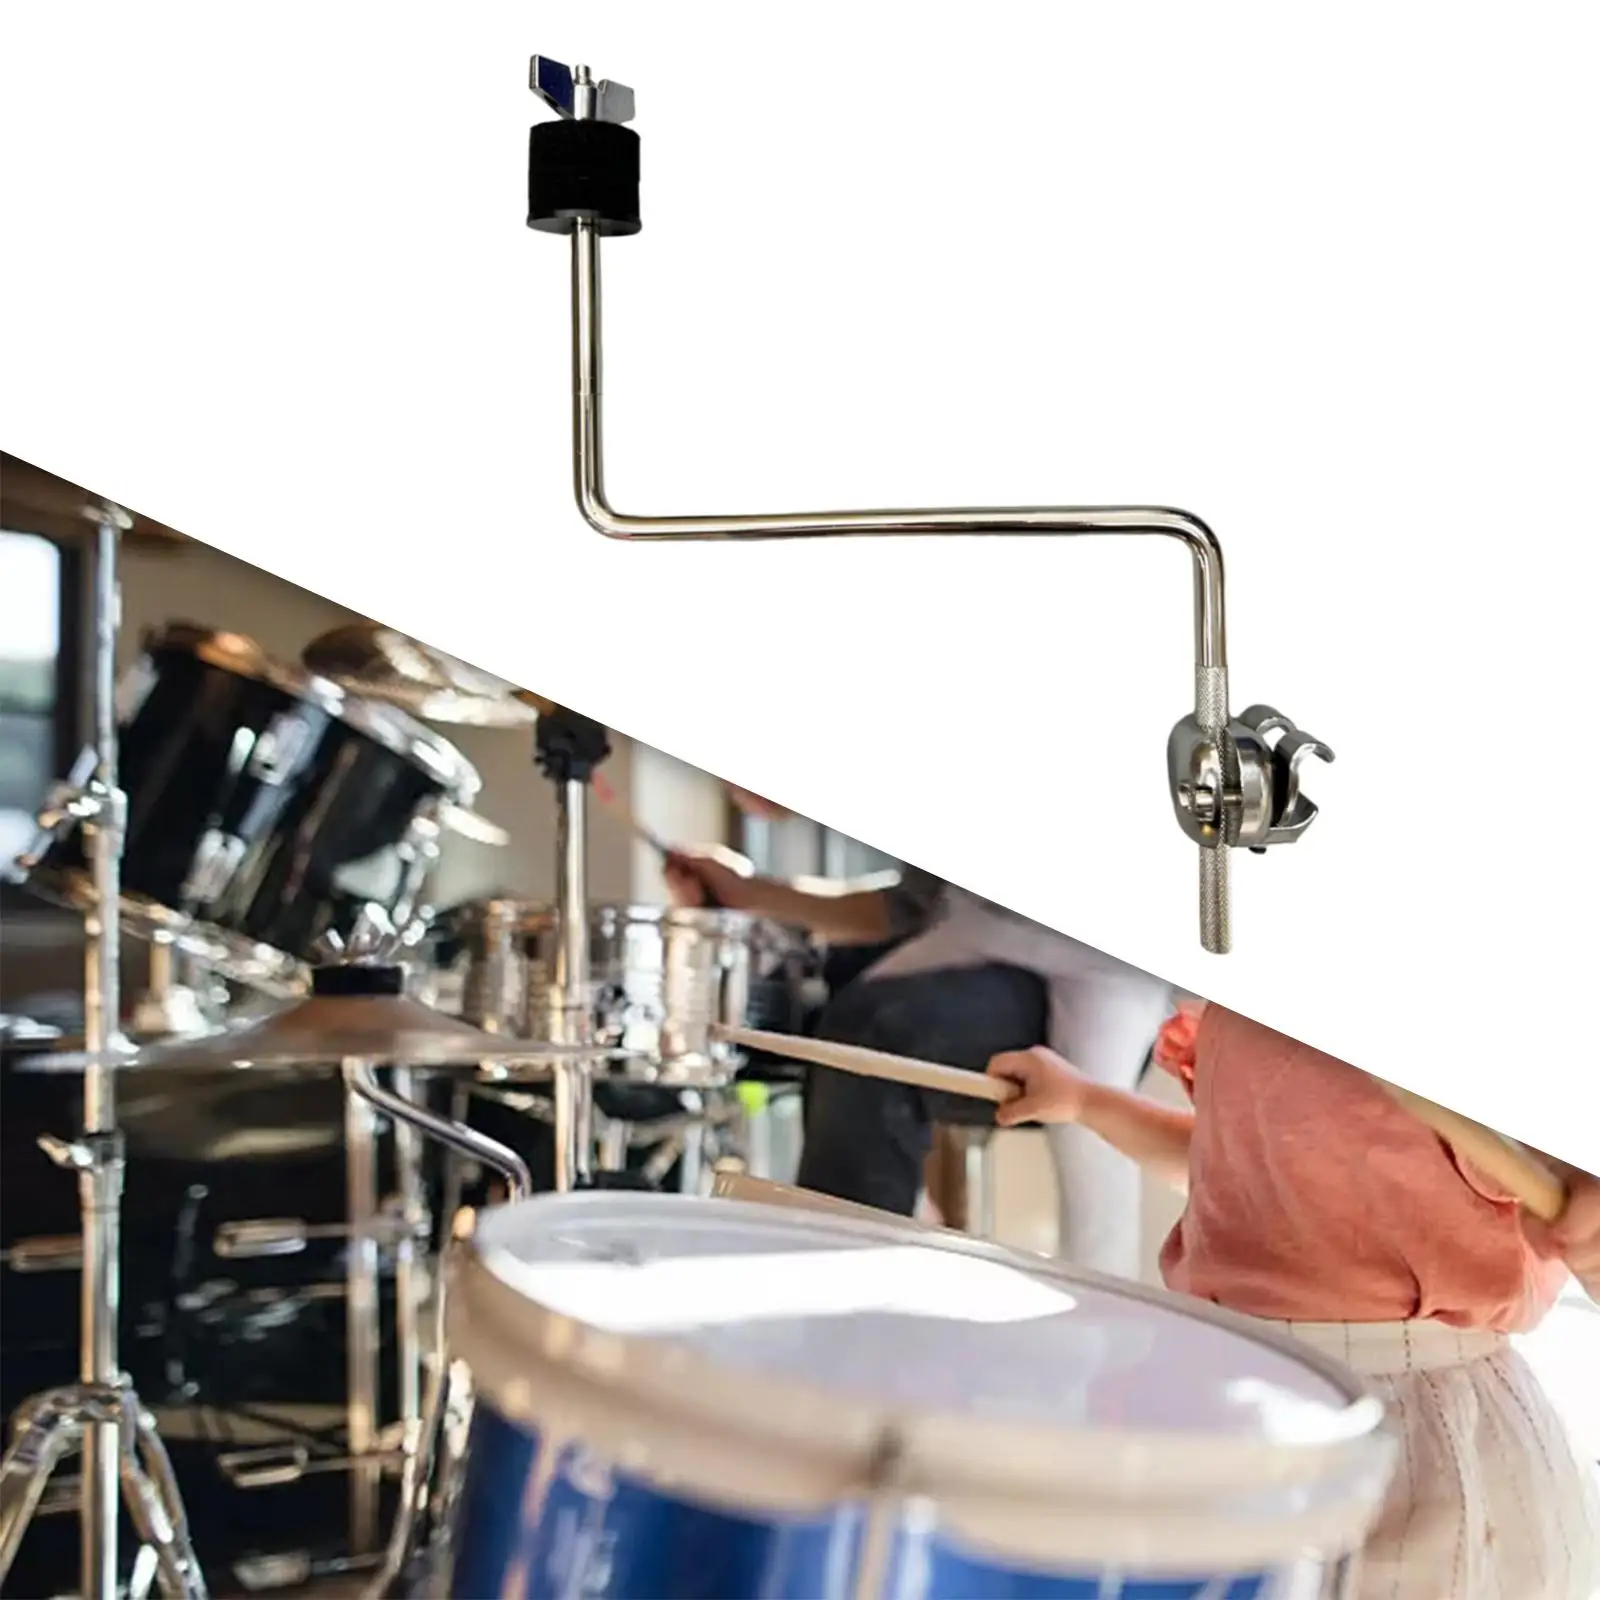 

Cymbal Mount Clamp Z Shaped accessories Sturdy Easy to Install Extension Clamps Arm Cymbal Stands Clips Cymbal Arm Clamp